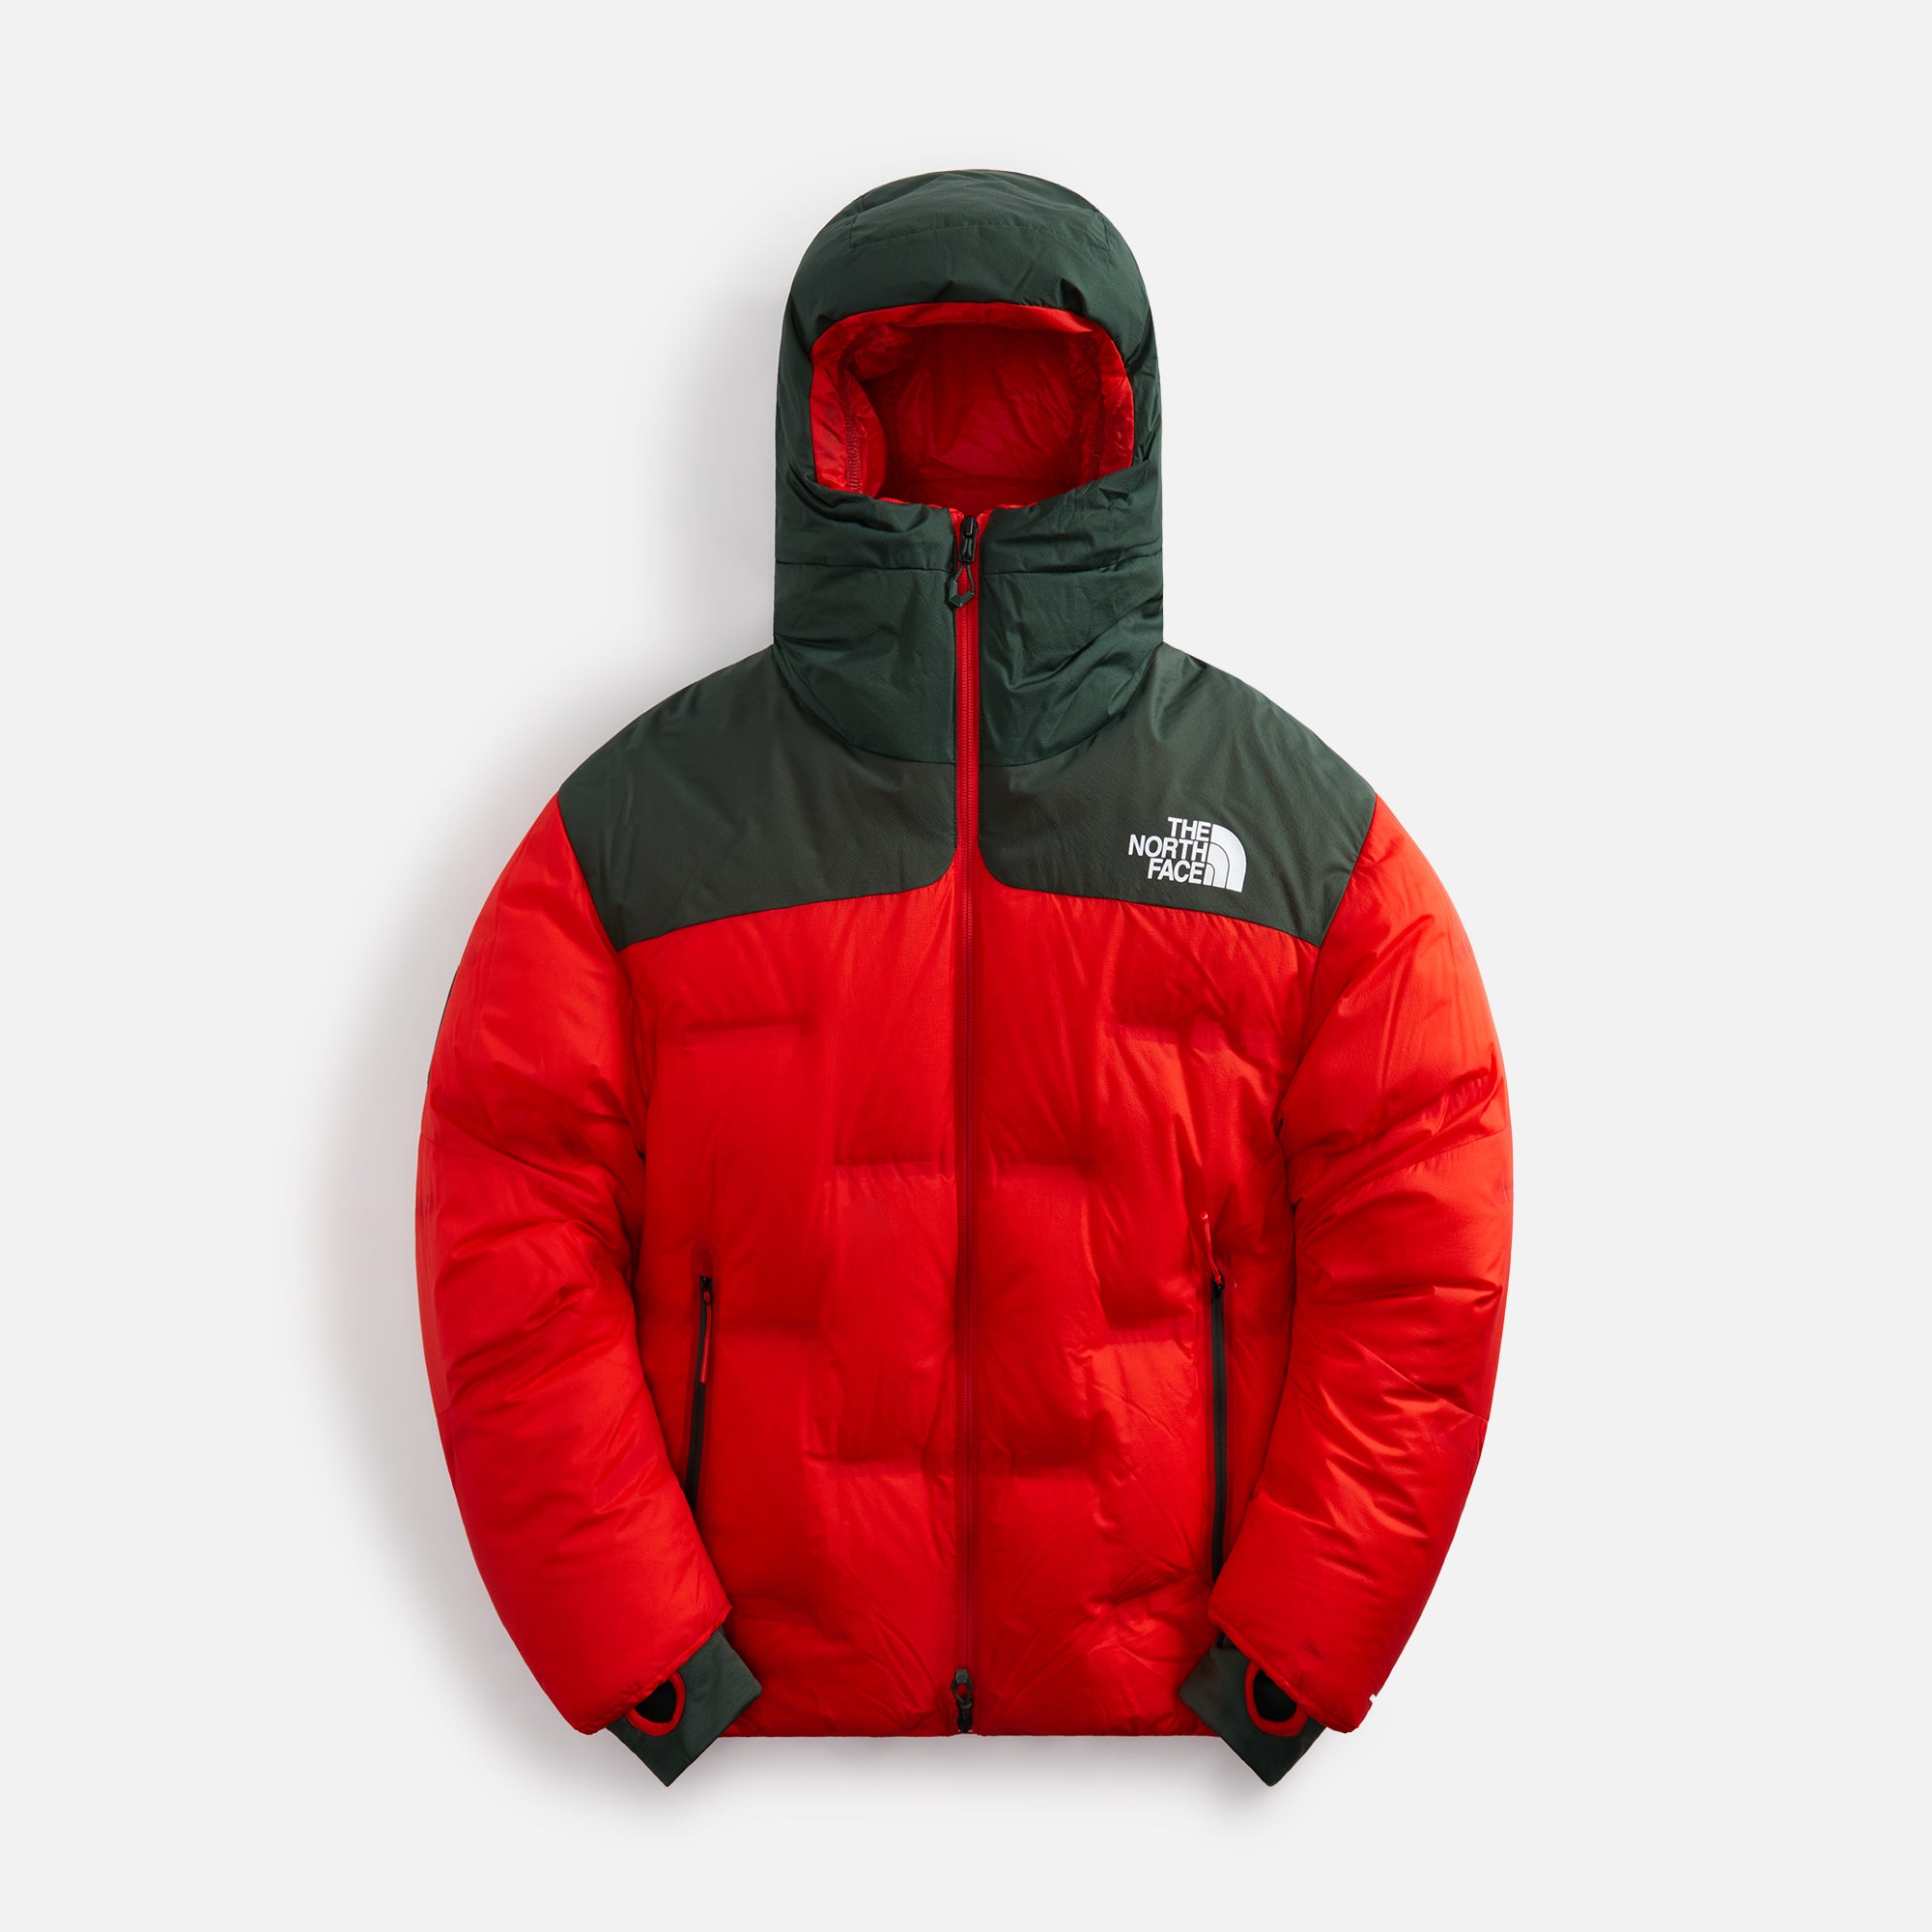 The North Face x Undercover Project Cloud Down - Nupste Dark